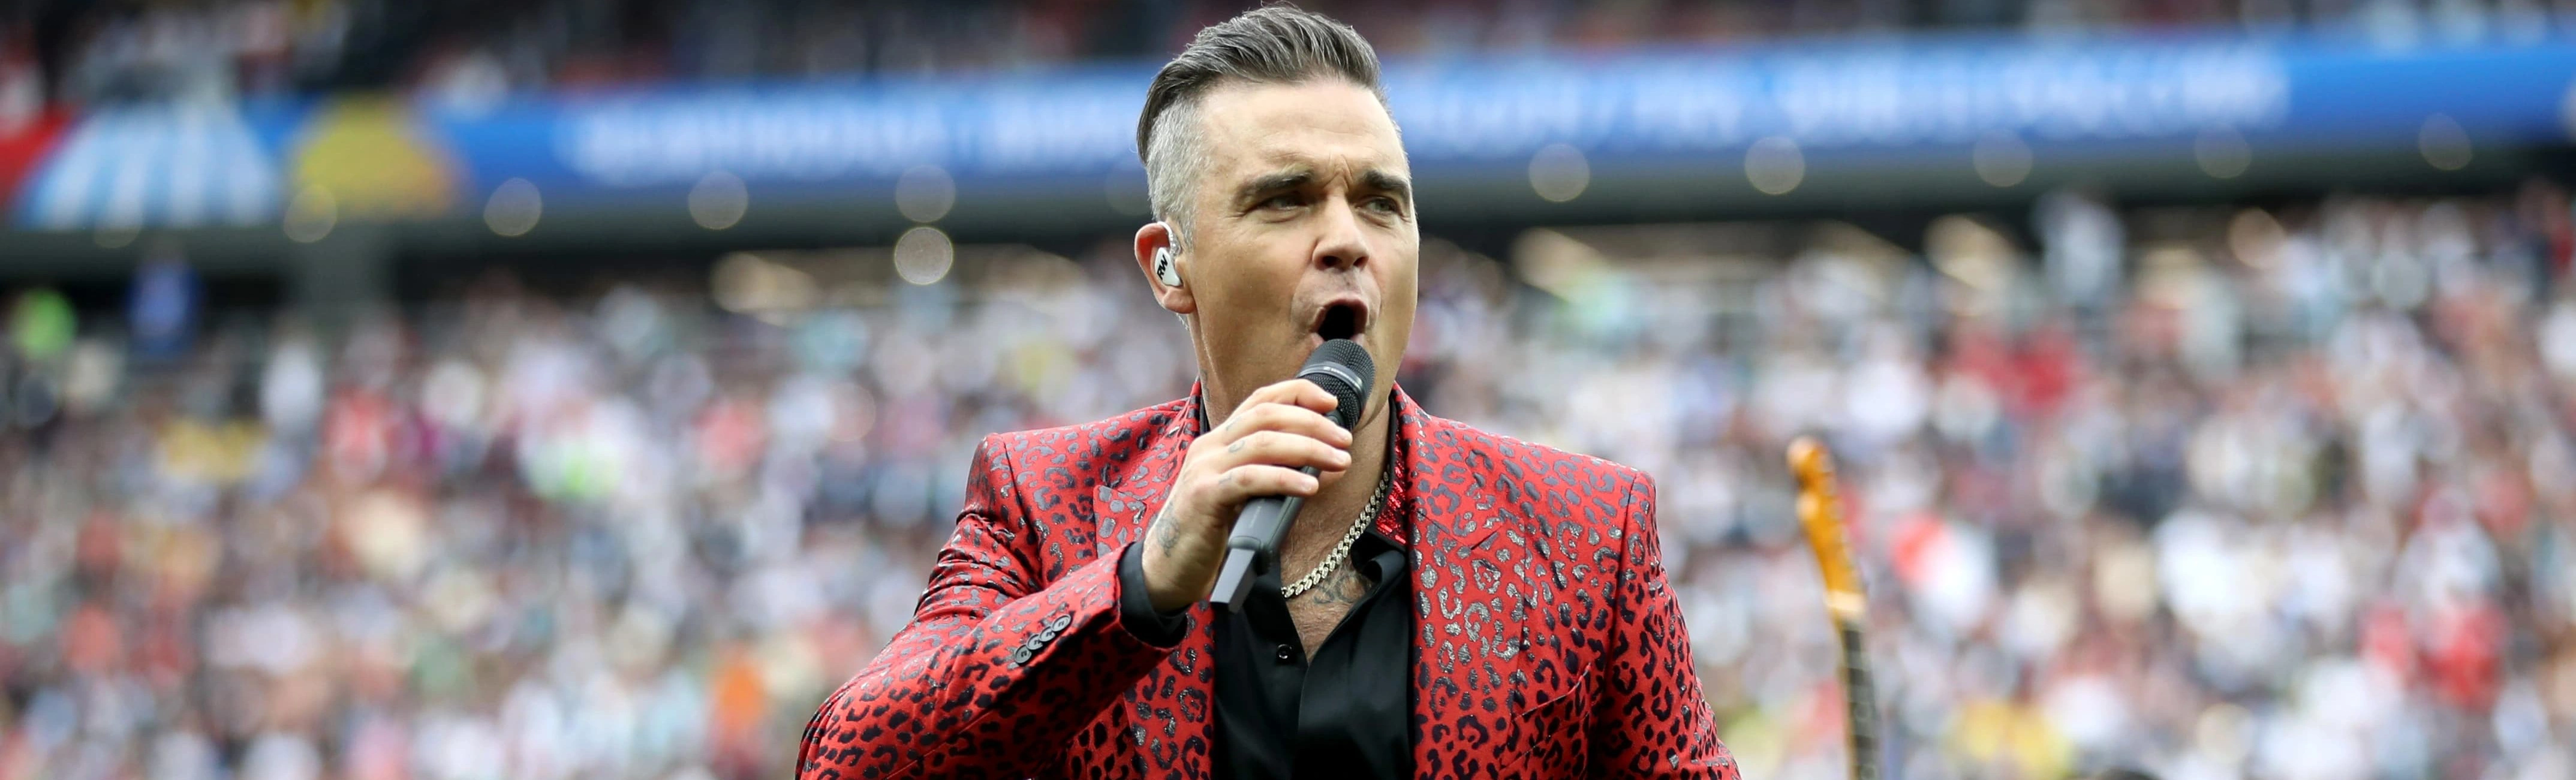 Don't miss your chance: Robbie Williams will perform for the first time at the Etihad Arena in Abu Dhabi!